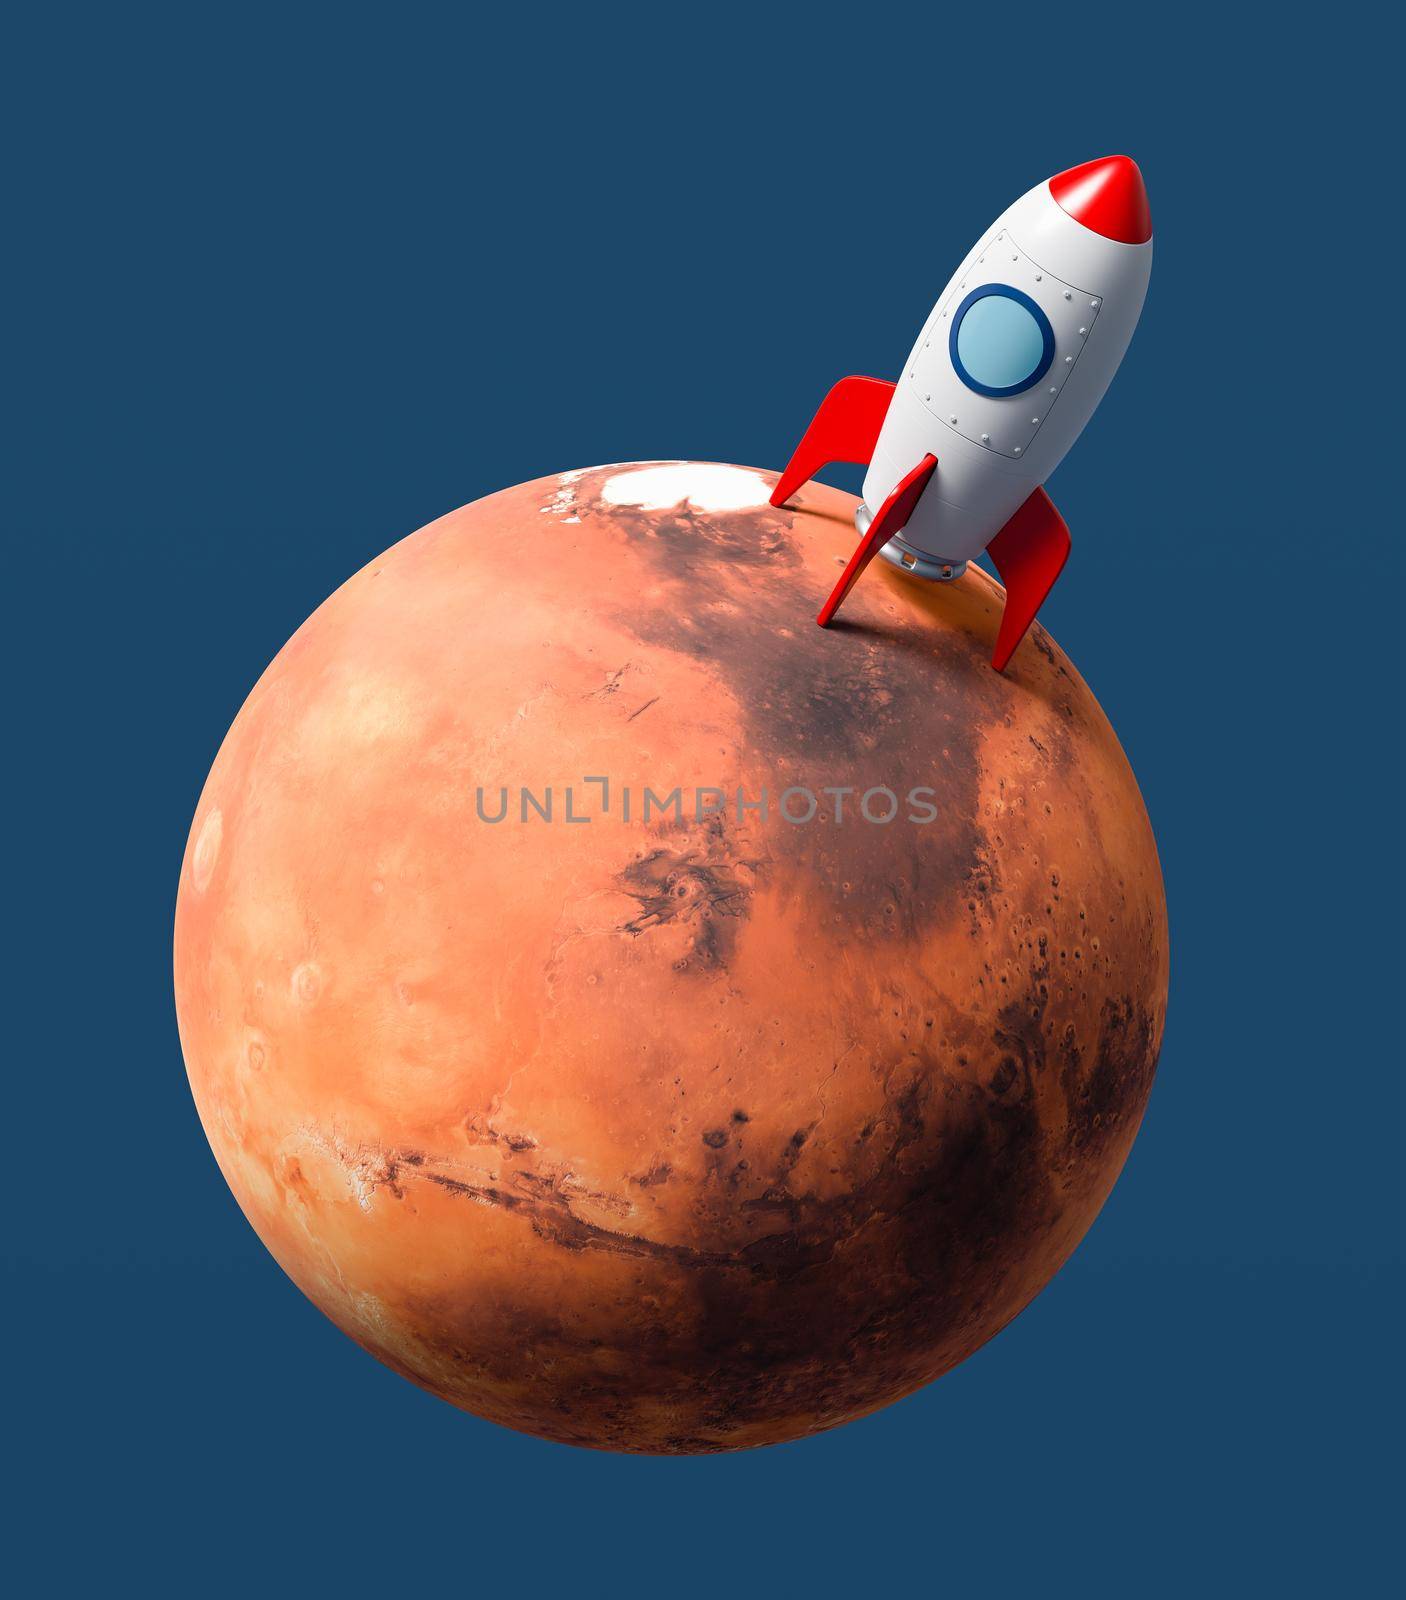 Red and White Cartoon Spaceship Landed on Mars Isolated on Flat Blue Background 3D Illustration, Space Exploration Concept. Texture from solarsystemscope.com